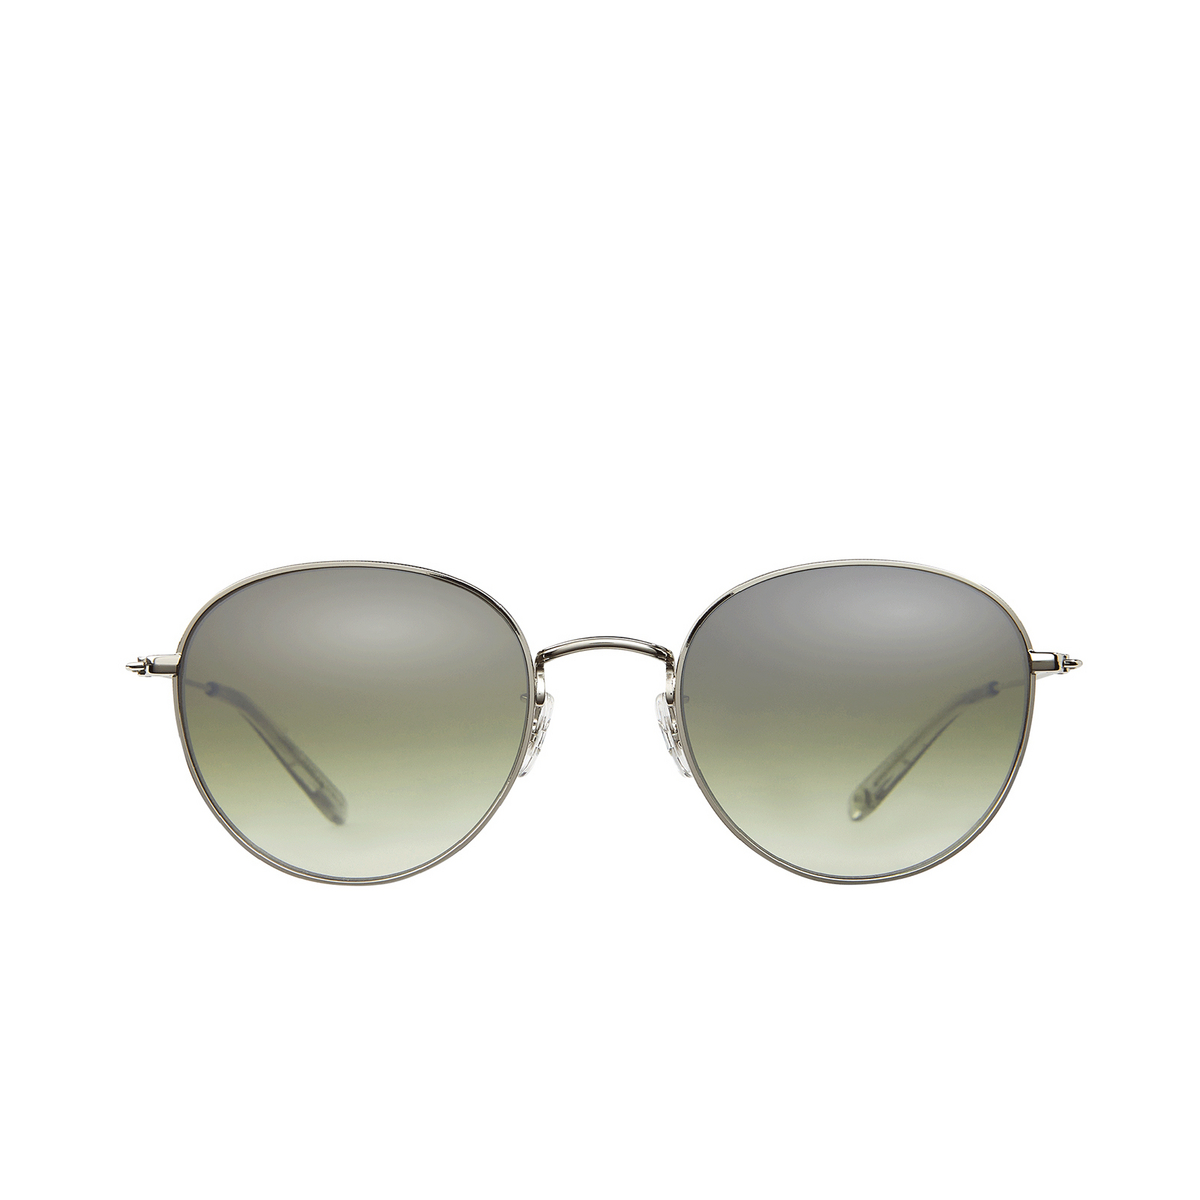 Garrett Leight® Round Sunglasses: Paloma M Sun color Sv-llg/sfolvlm Silver-llg/semi-flat Olive Layered Mirror - front view